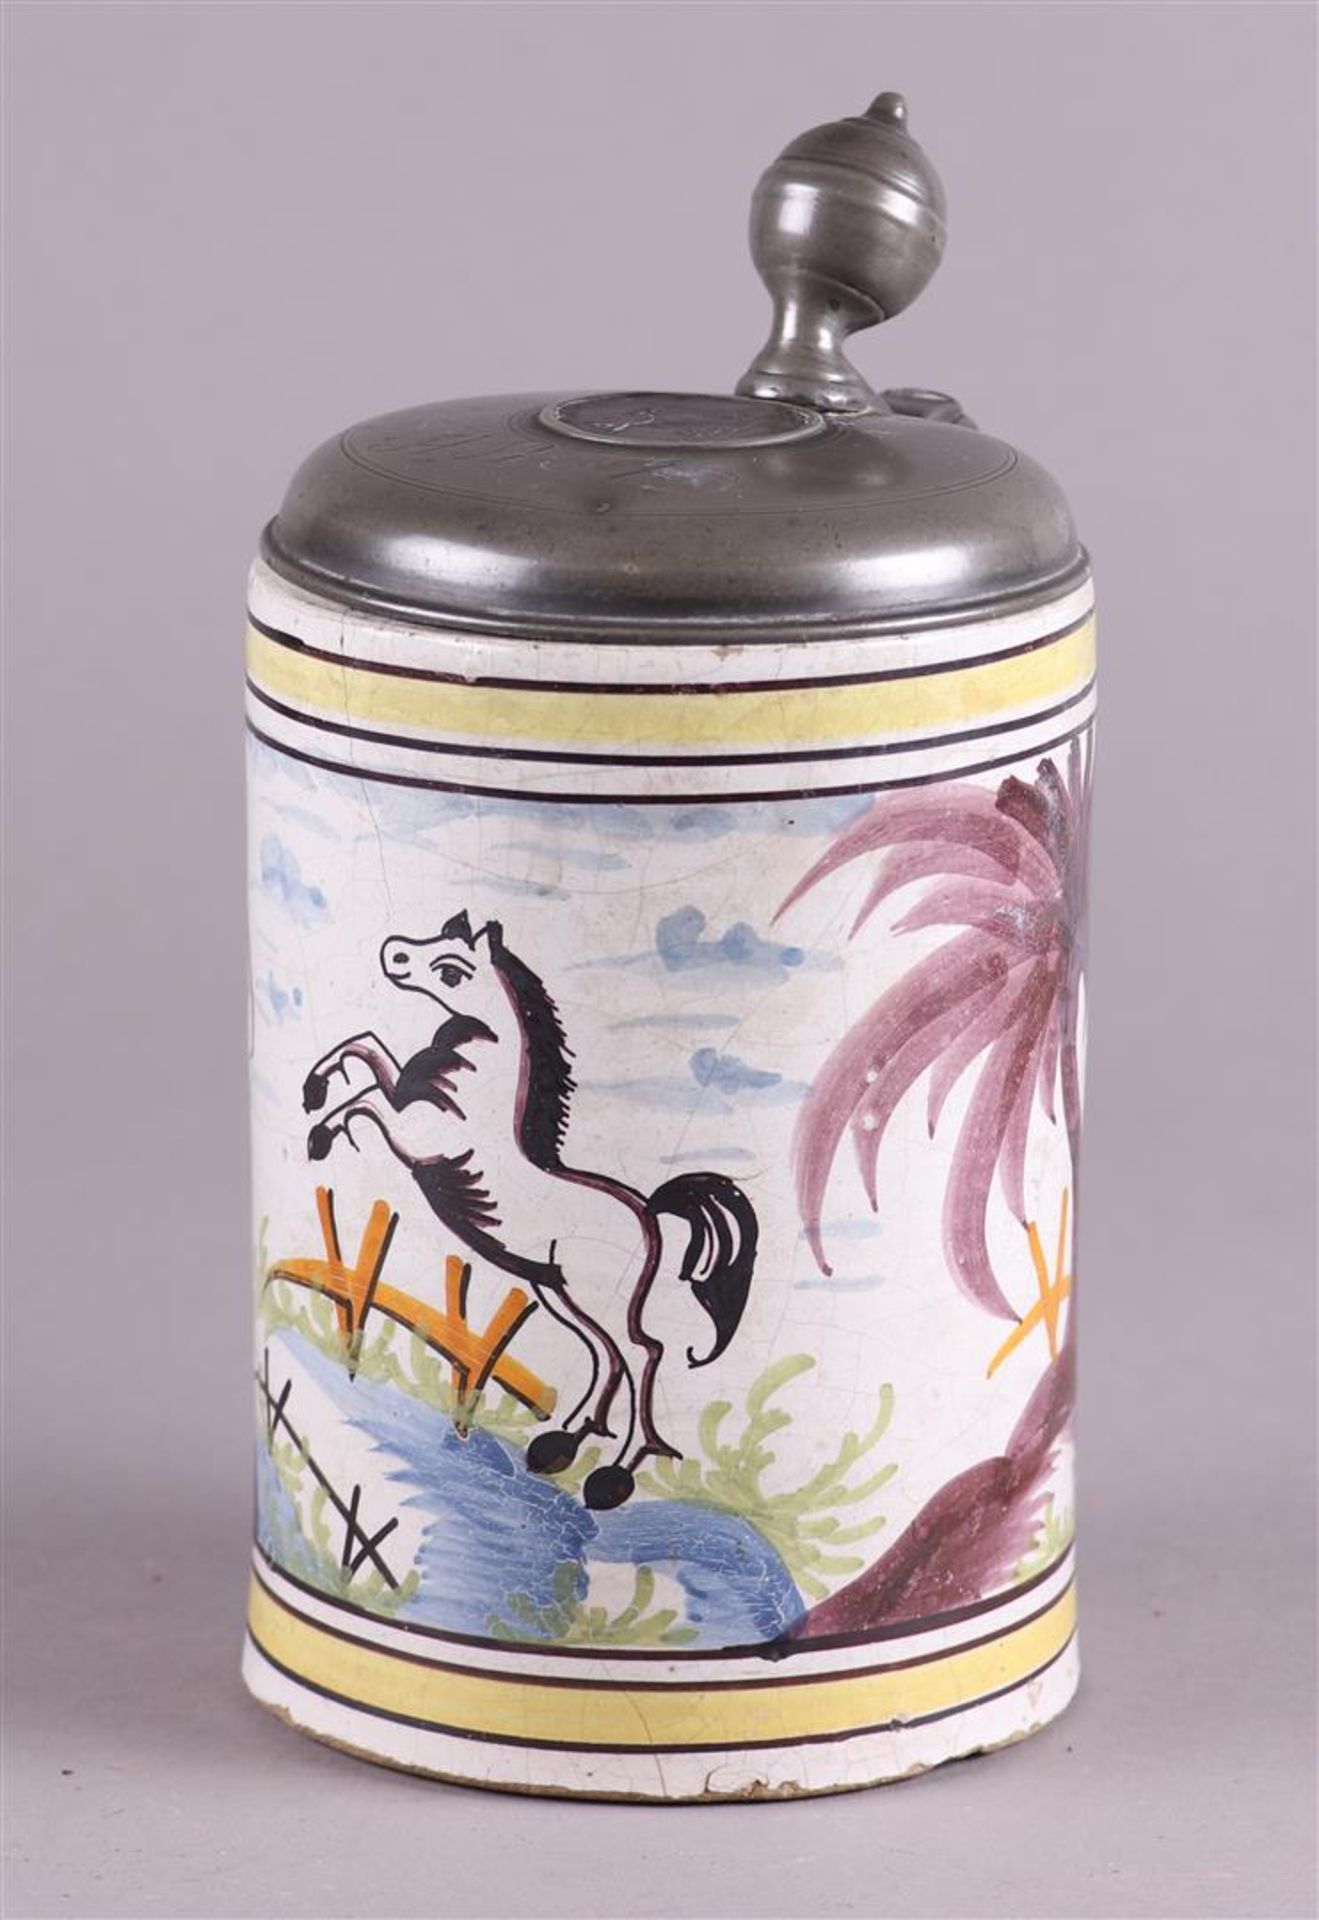 An earthenware beer jug with a polychrome decor of a rearing horse, with a pewter lid.